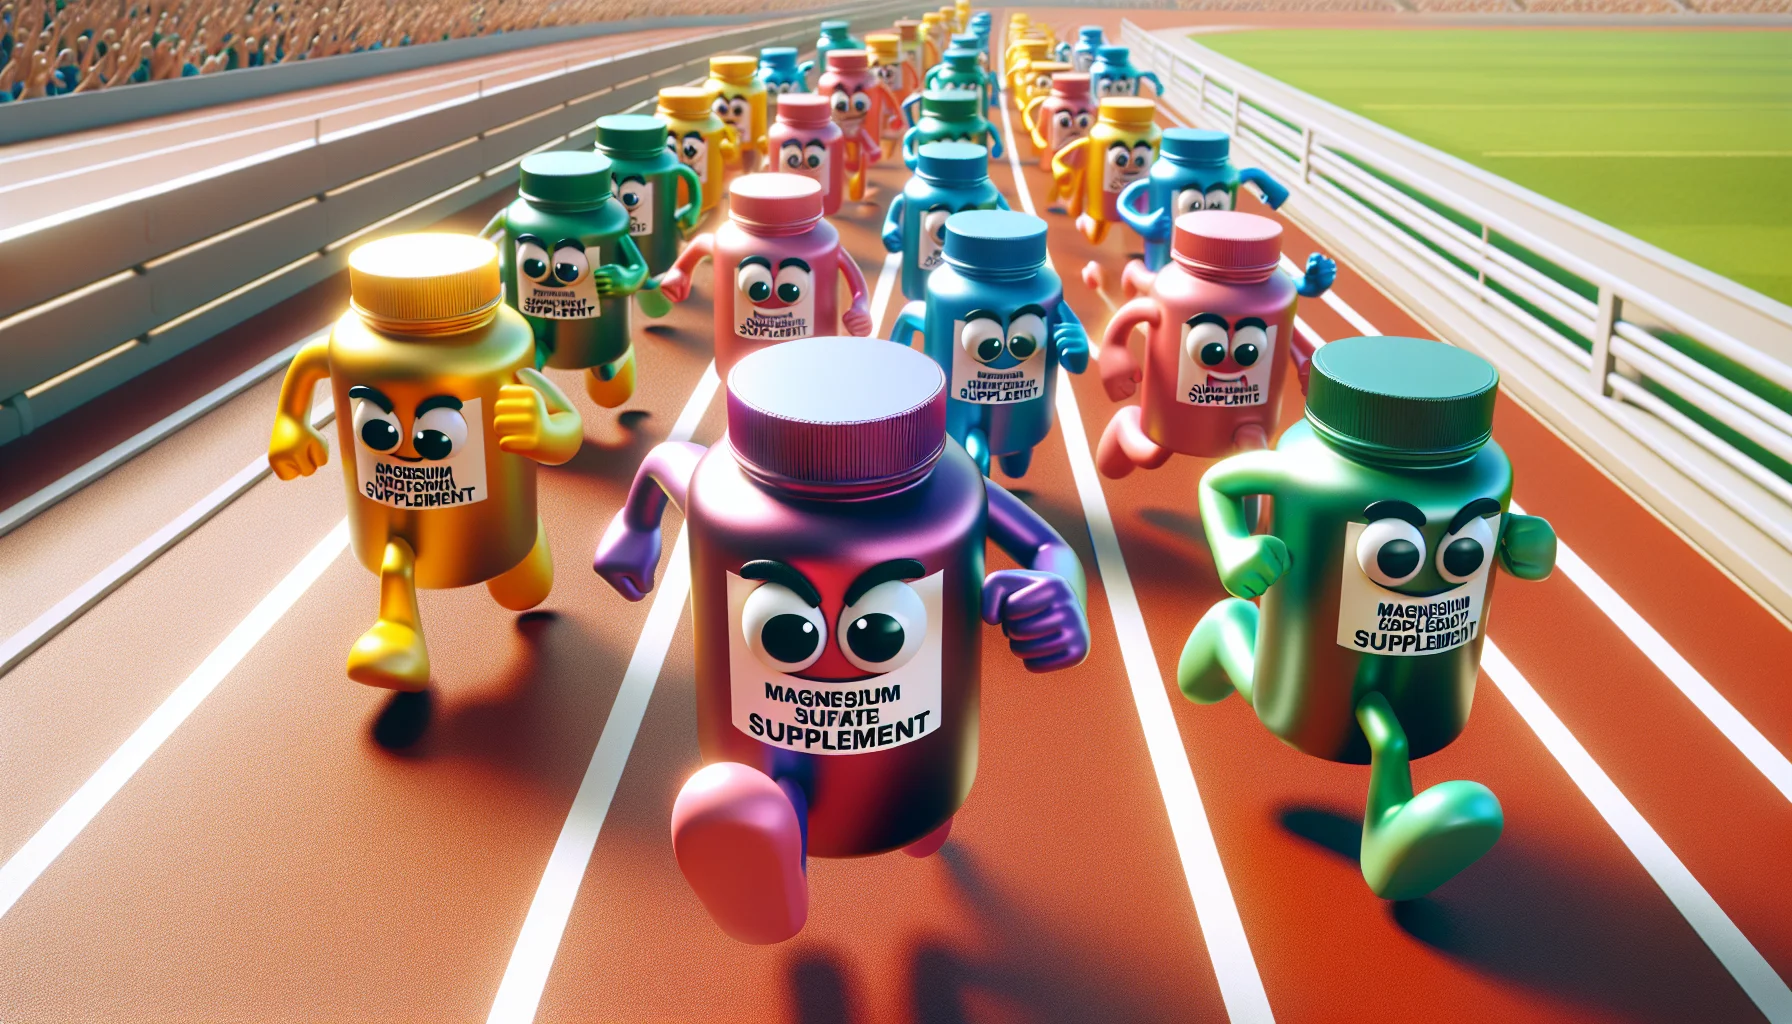 Generate an image where a richly colored bottle labeled 'Magnesium Sulfate Supplement', is running in a race with other supplement bottles. Each bottle has a pair of cartoon-like eyes and cartoonish legs, showing excitement and competitiveness. They race along a well-maintained track, the audience on the sidelines cheering with enthusiasm. The magnesium sulfate bottle leads the race, with a playful smile drawn on it. The scene is set in bright daylight, creating a vibrant atmosphere that encourages the use of supplements for sports.